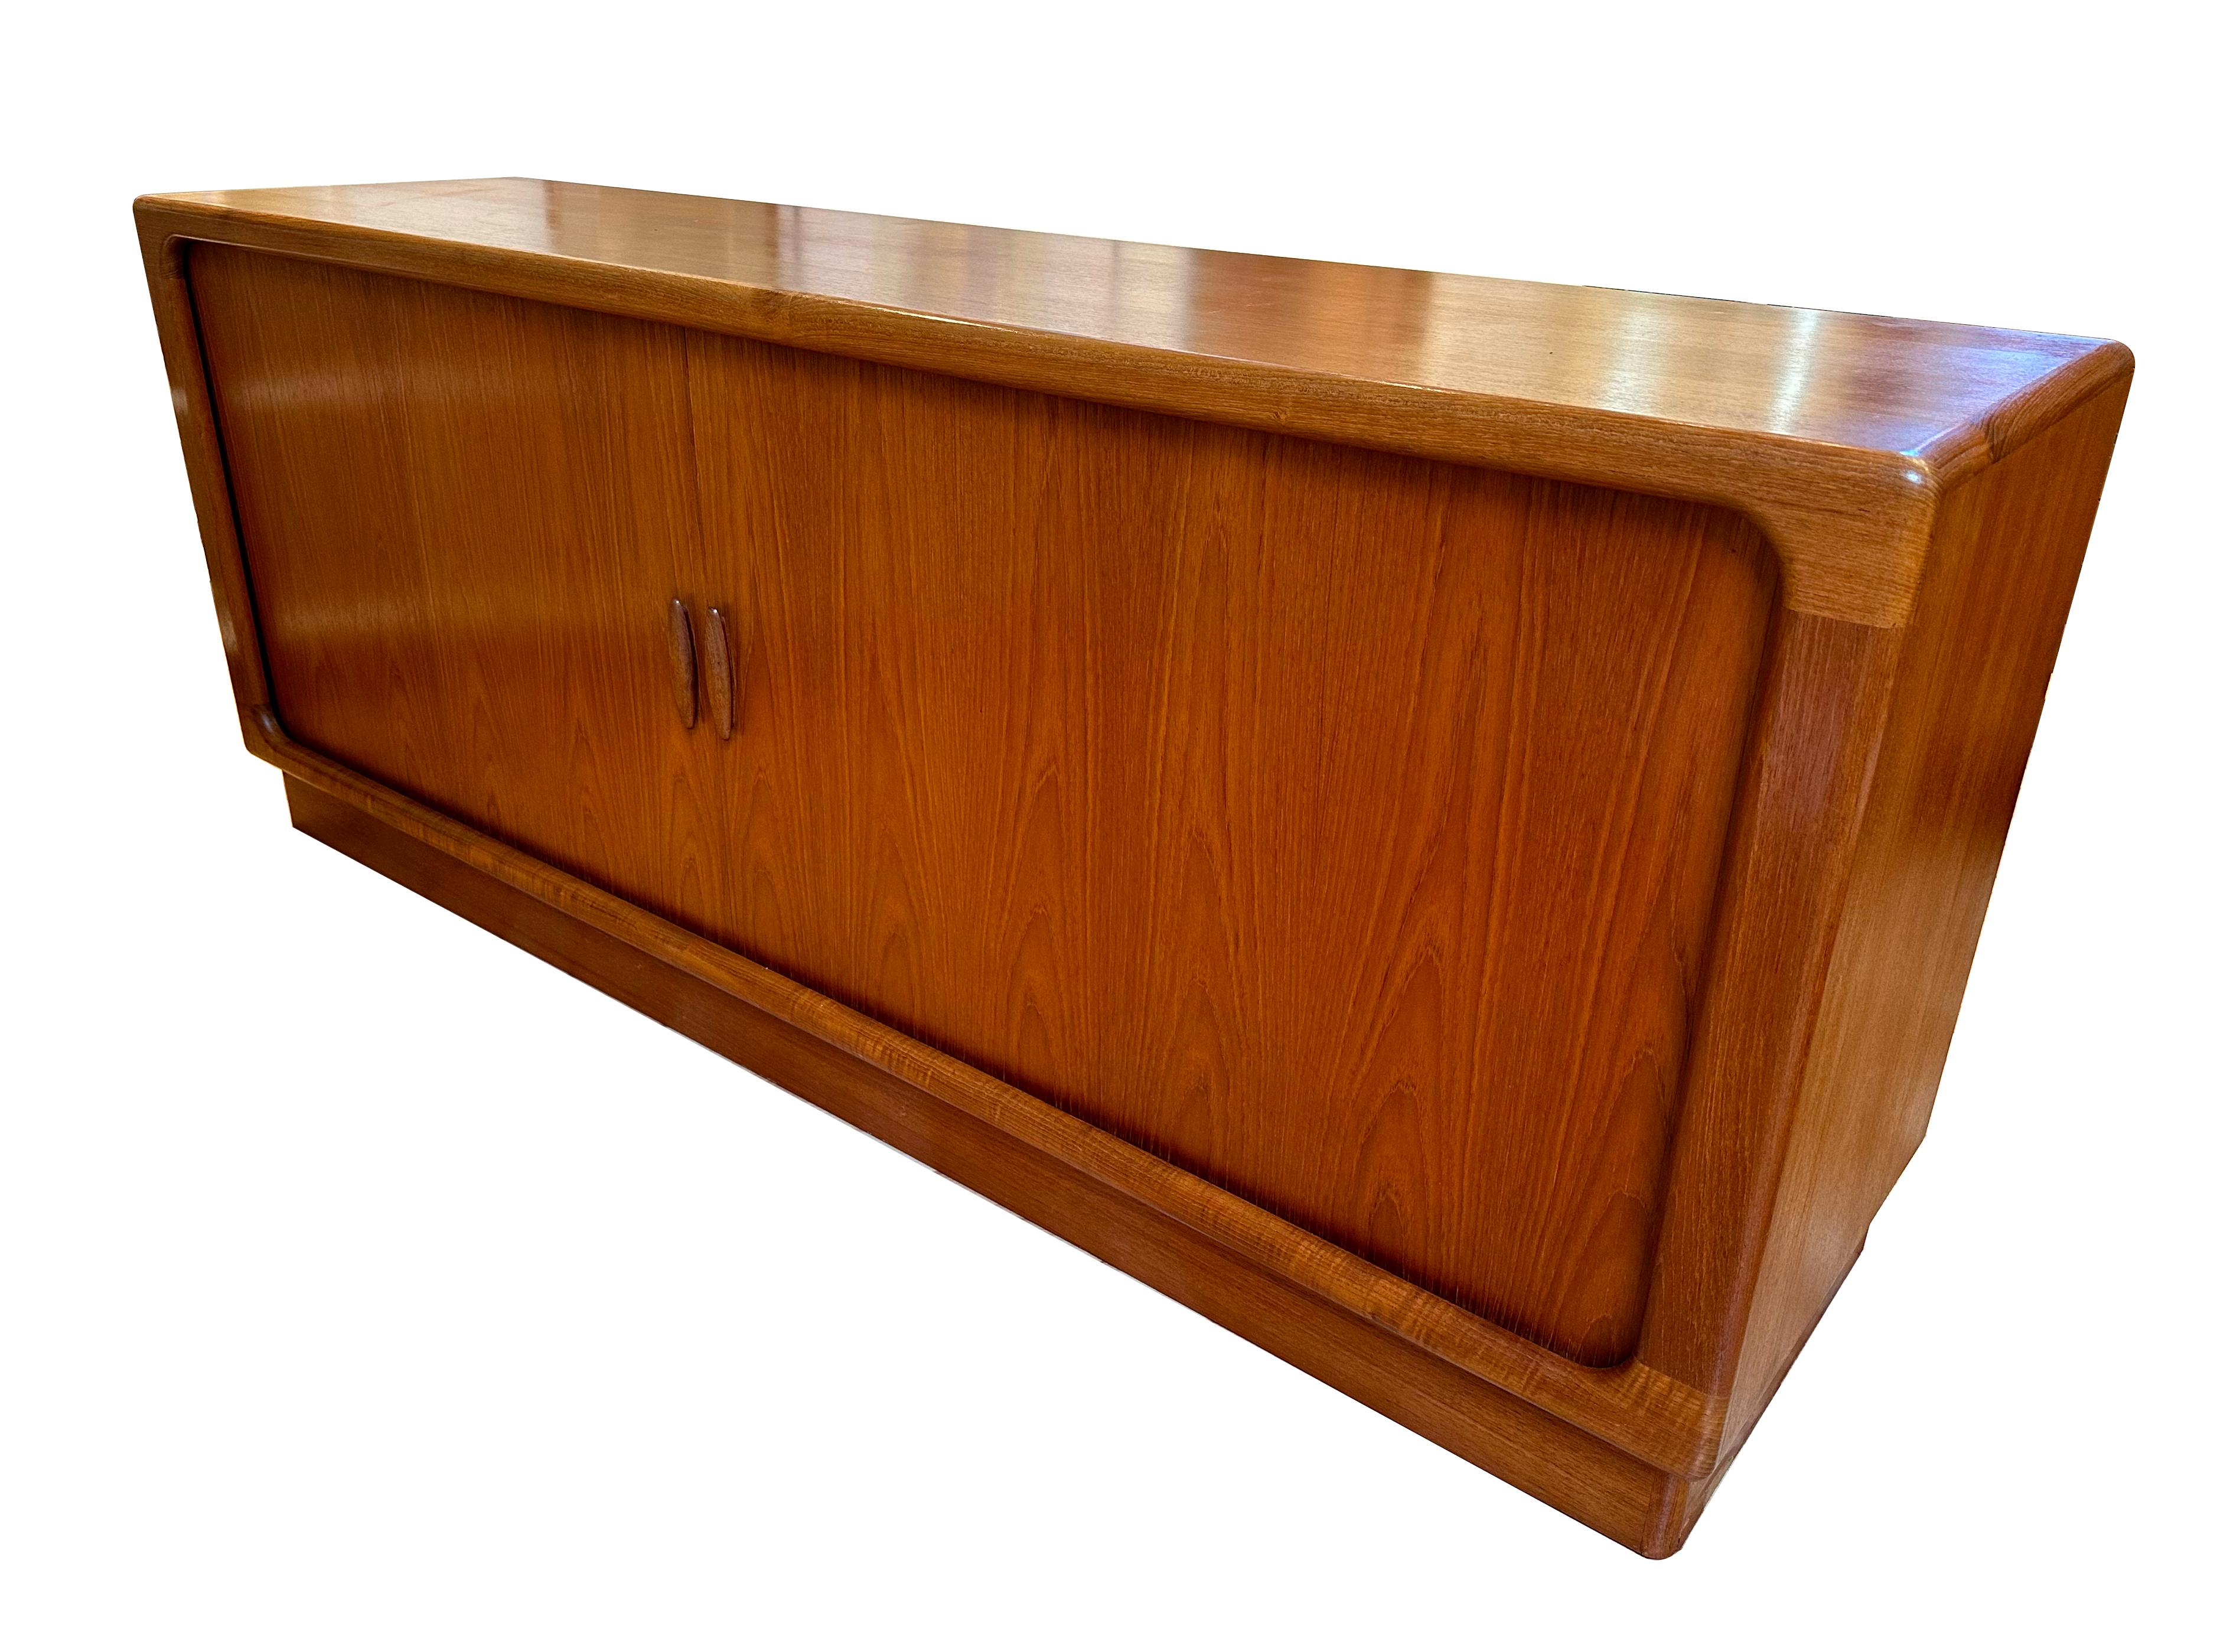 Danish Modern teak credenza by Dyrlund. The credenza has sliding tambour doors and turned teak pulls, and has three adjustable shelves and five drawers, with a felt-lined top drawer. In excellent condition, though there is some veneer damage to the